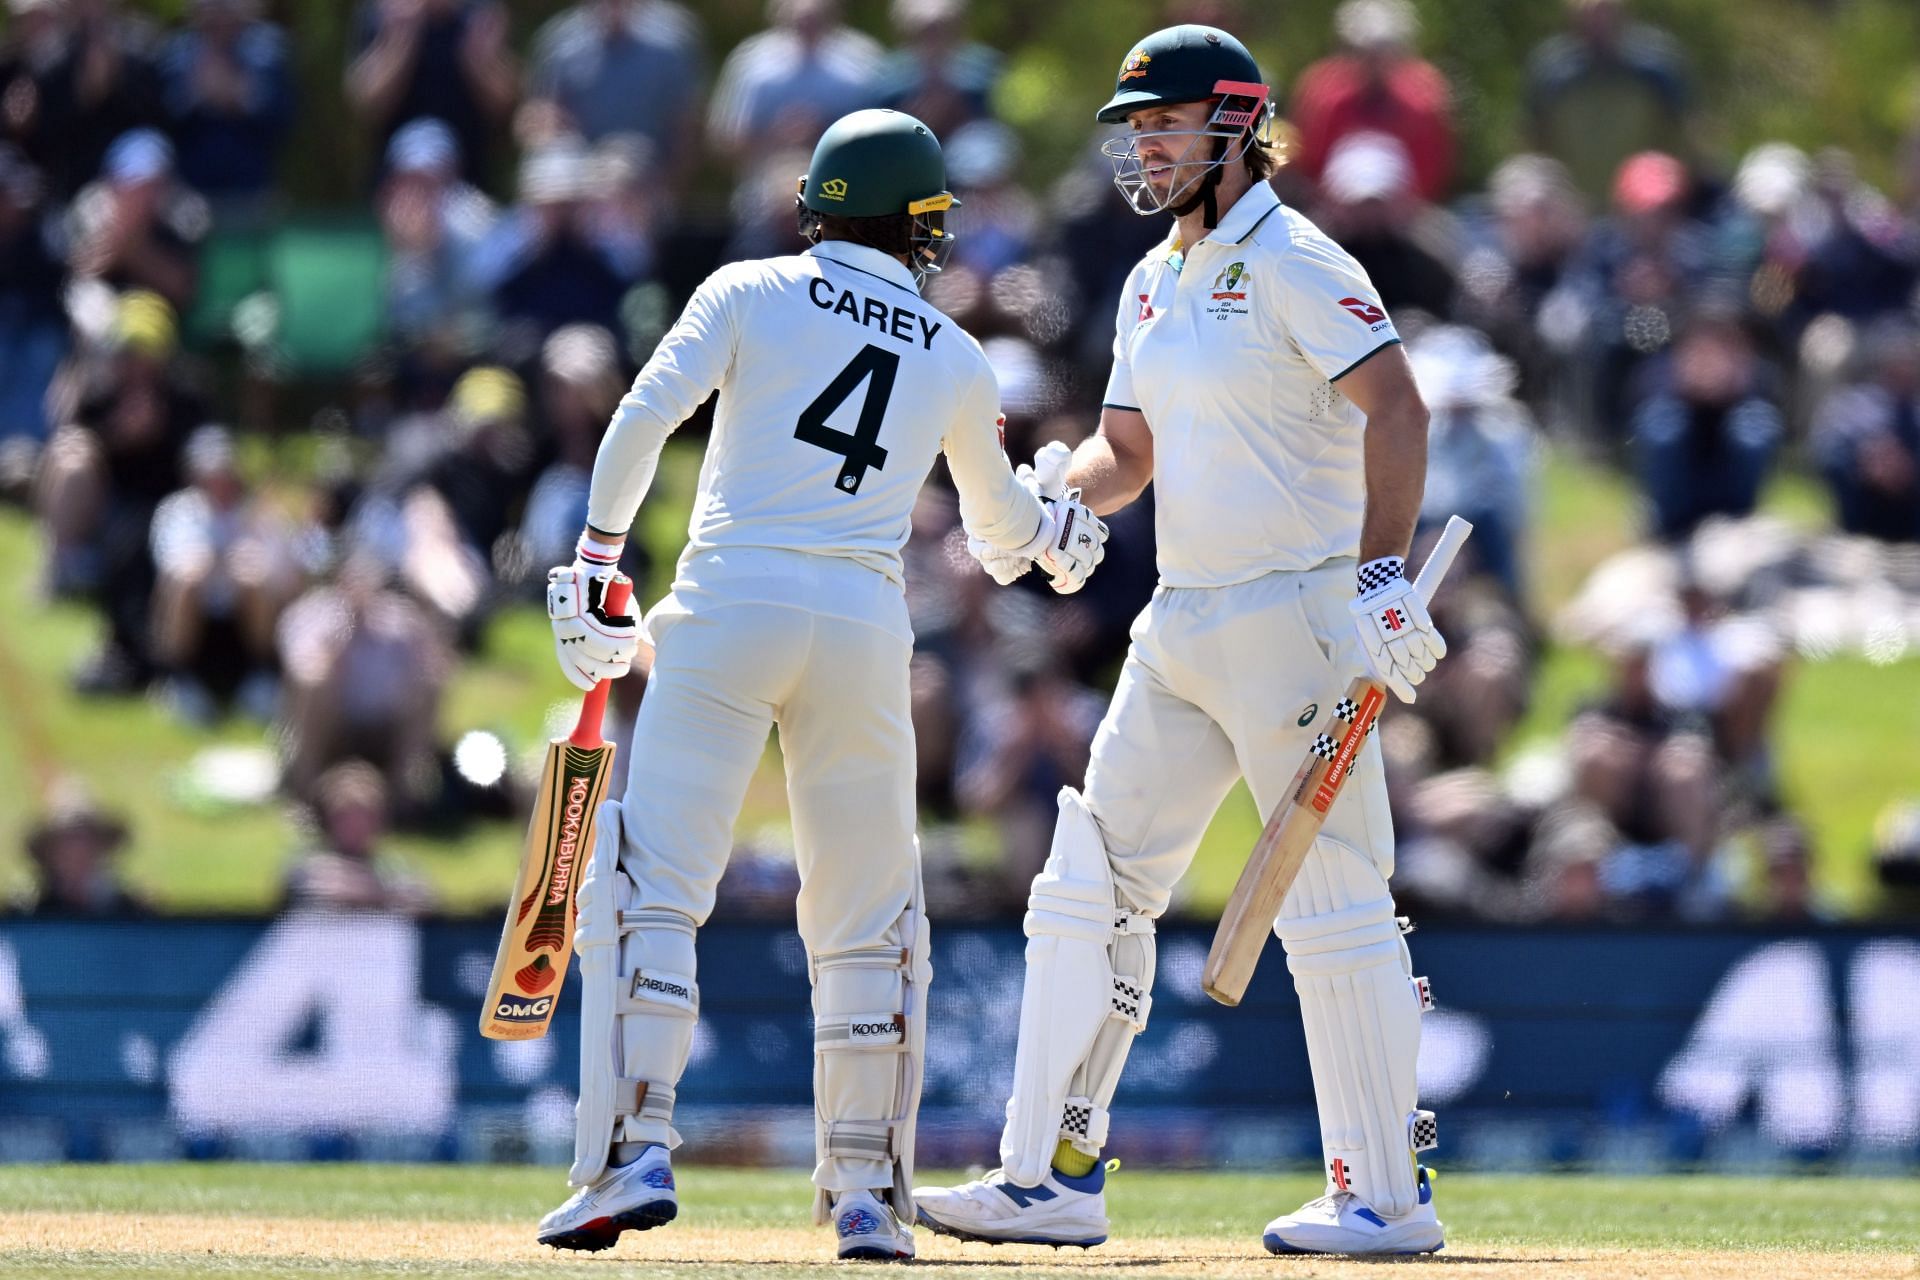 Mitchell Marsh of Australia (R) is congratulated by Alex Carey of Australia after scoring a half-century during day four of the Second Test in the series between New Zealand and Australia at Hagley Oval.